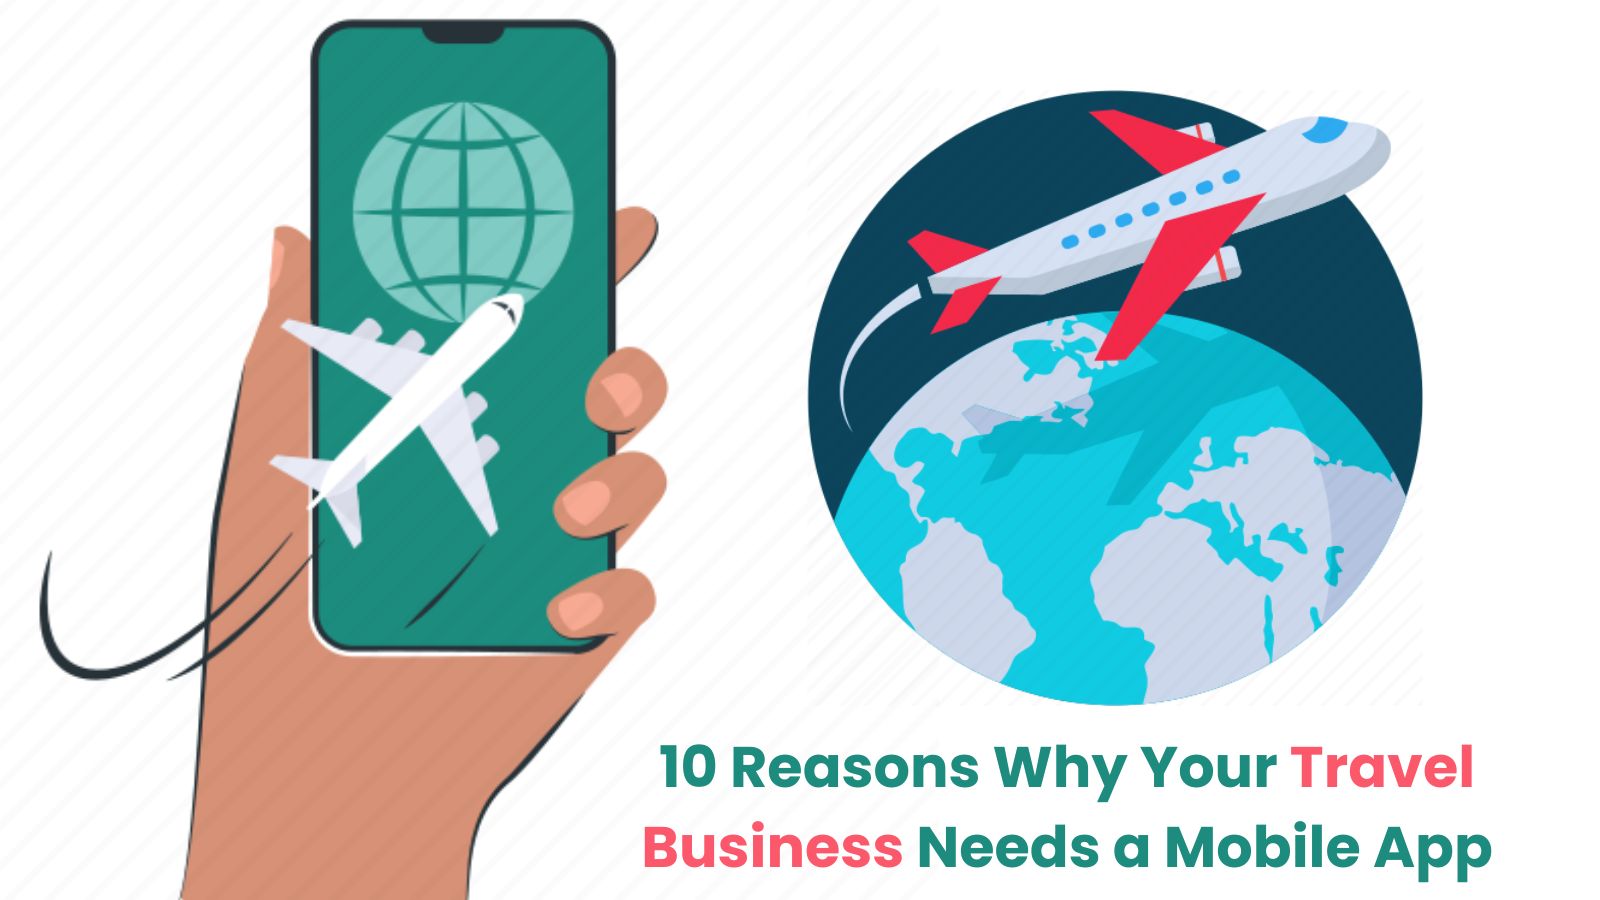 10-reasons-why-your-travel-business-needs-a-mobile-app